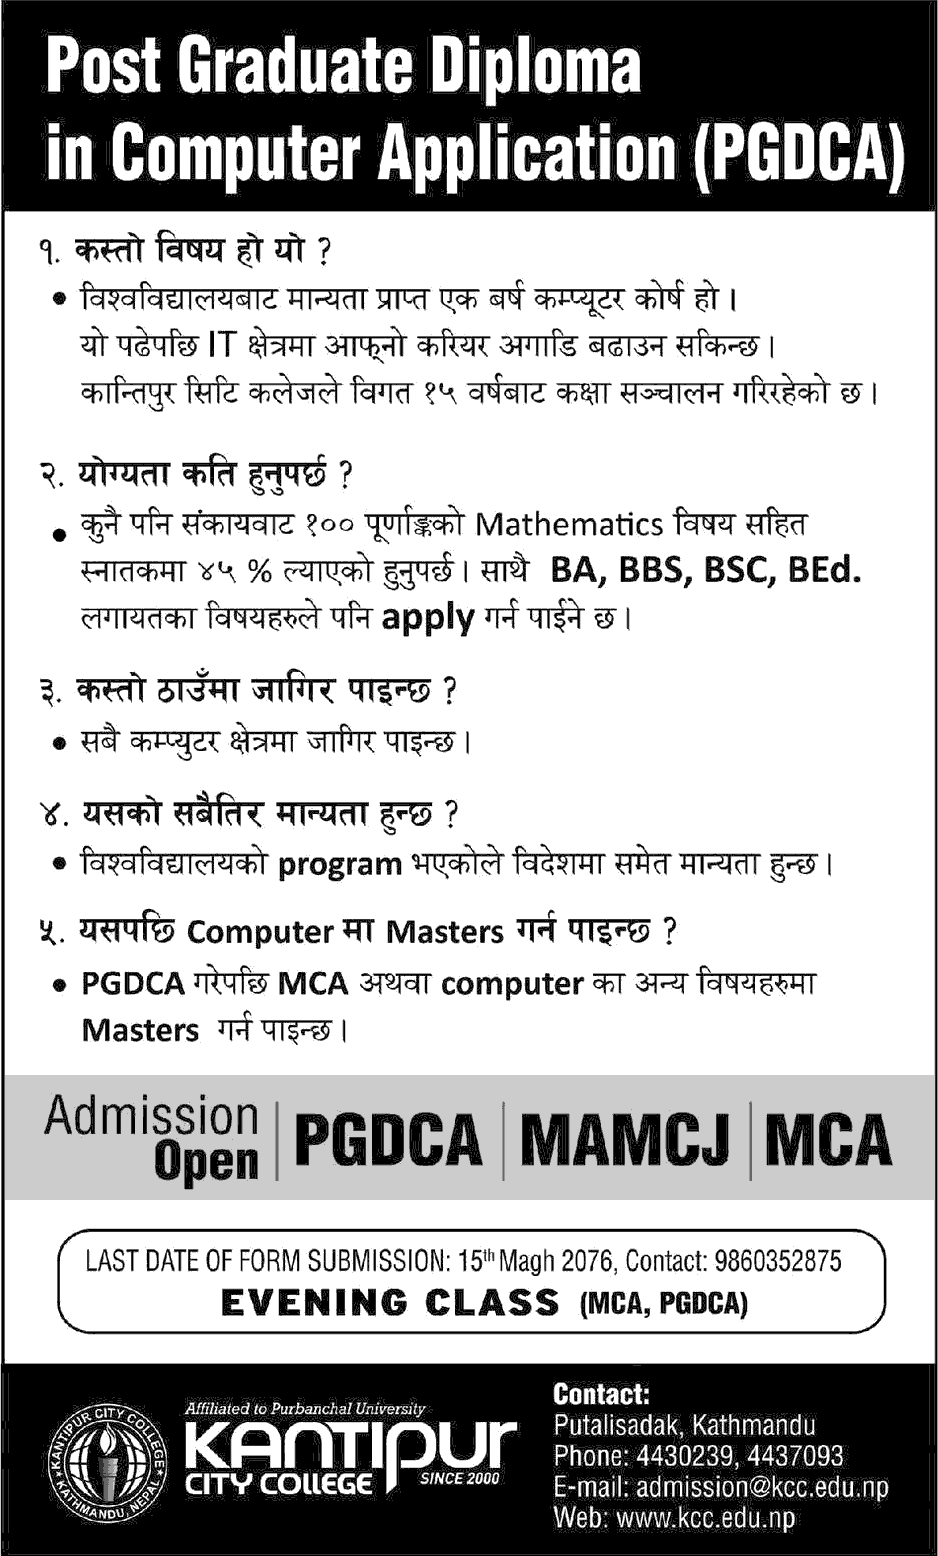 Post Graduate Diploma in Computer Application (PGDCA) Admission Open at Kantipur City College